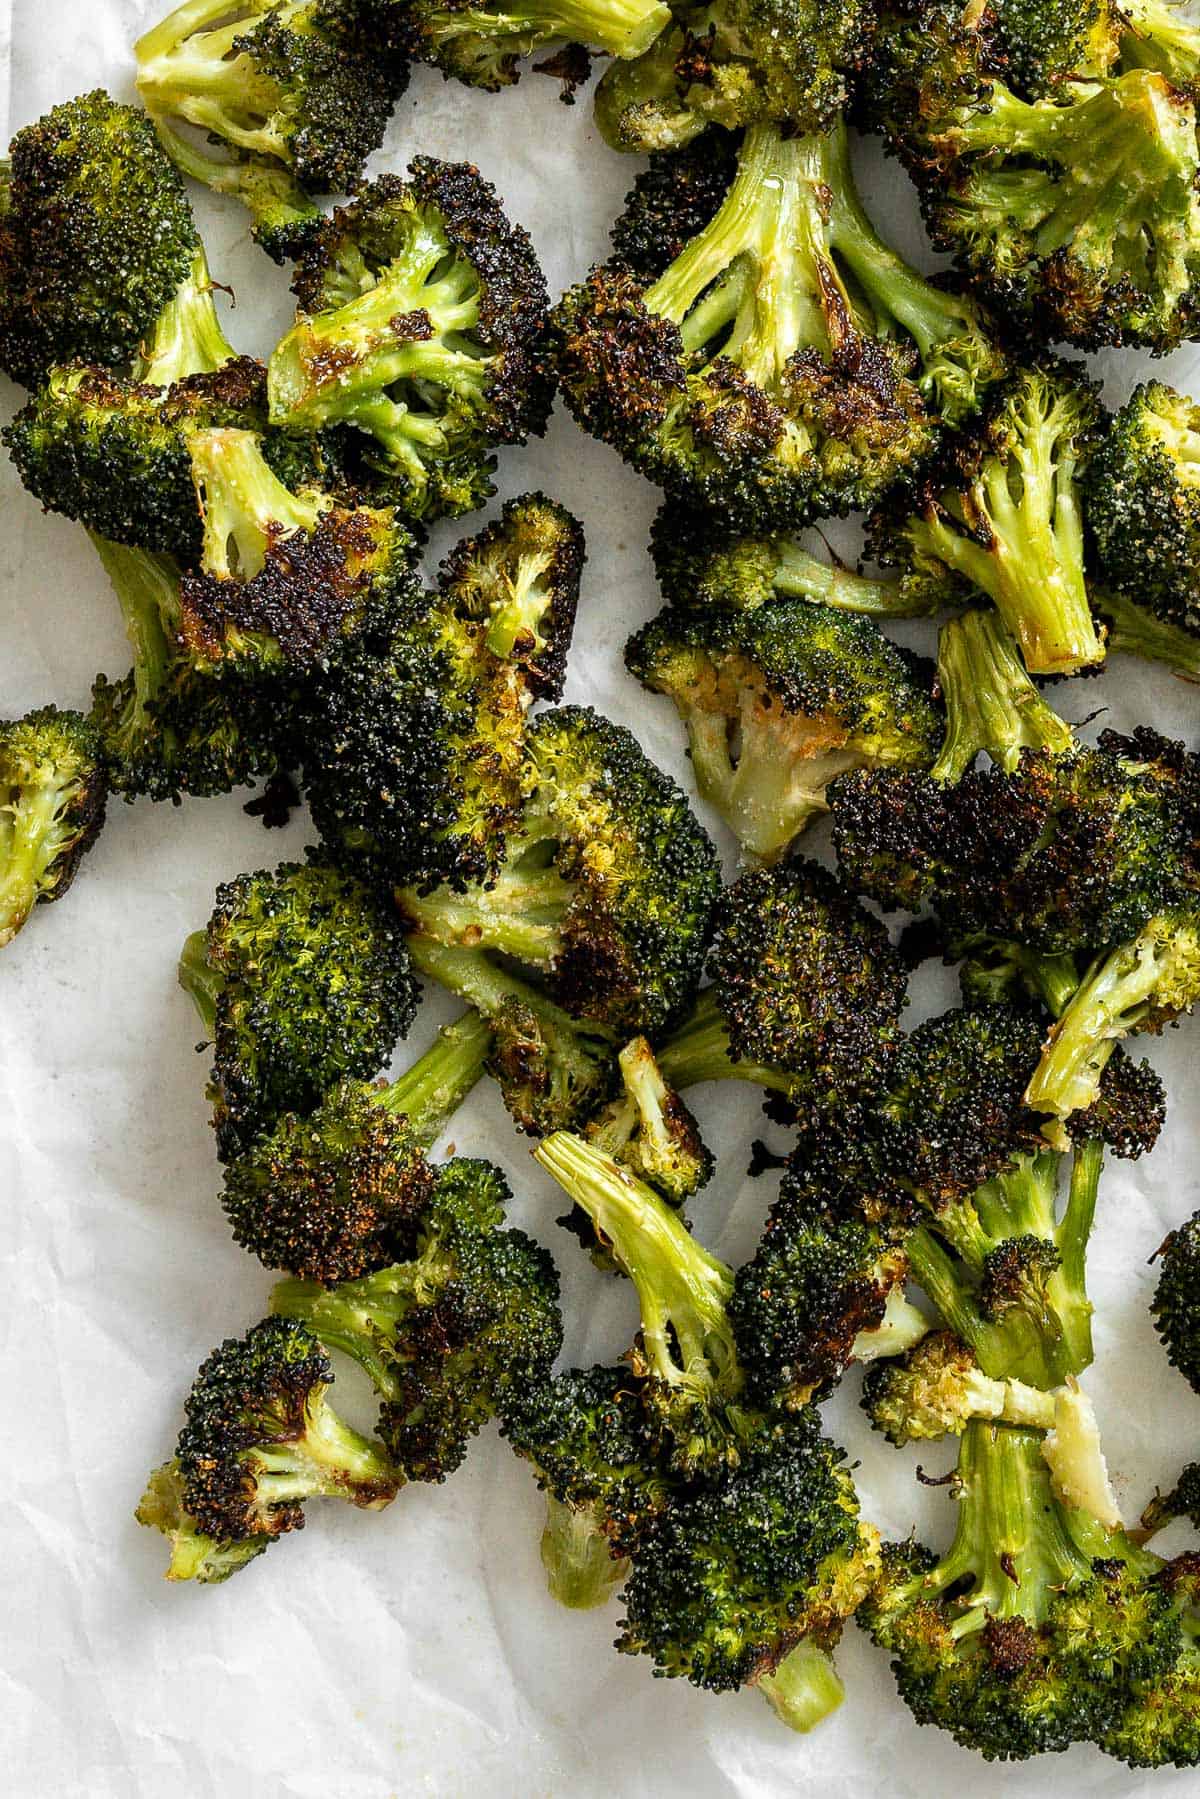 completed Oven Charred Broccoli on a white surface